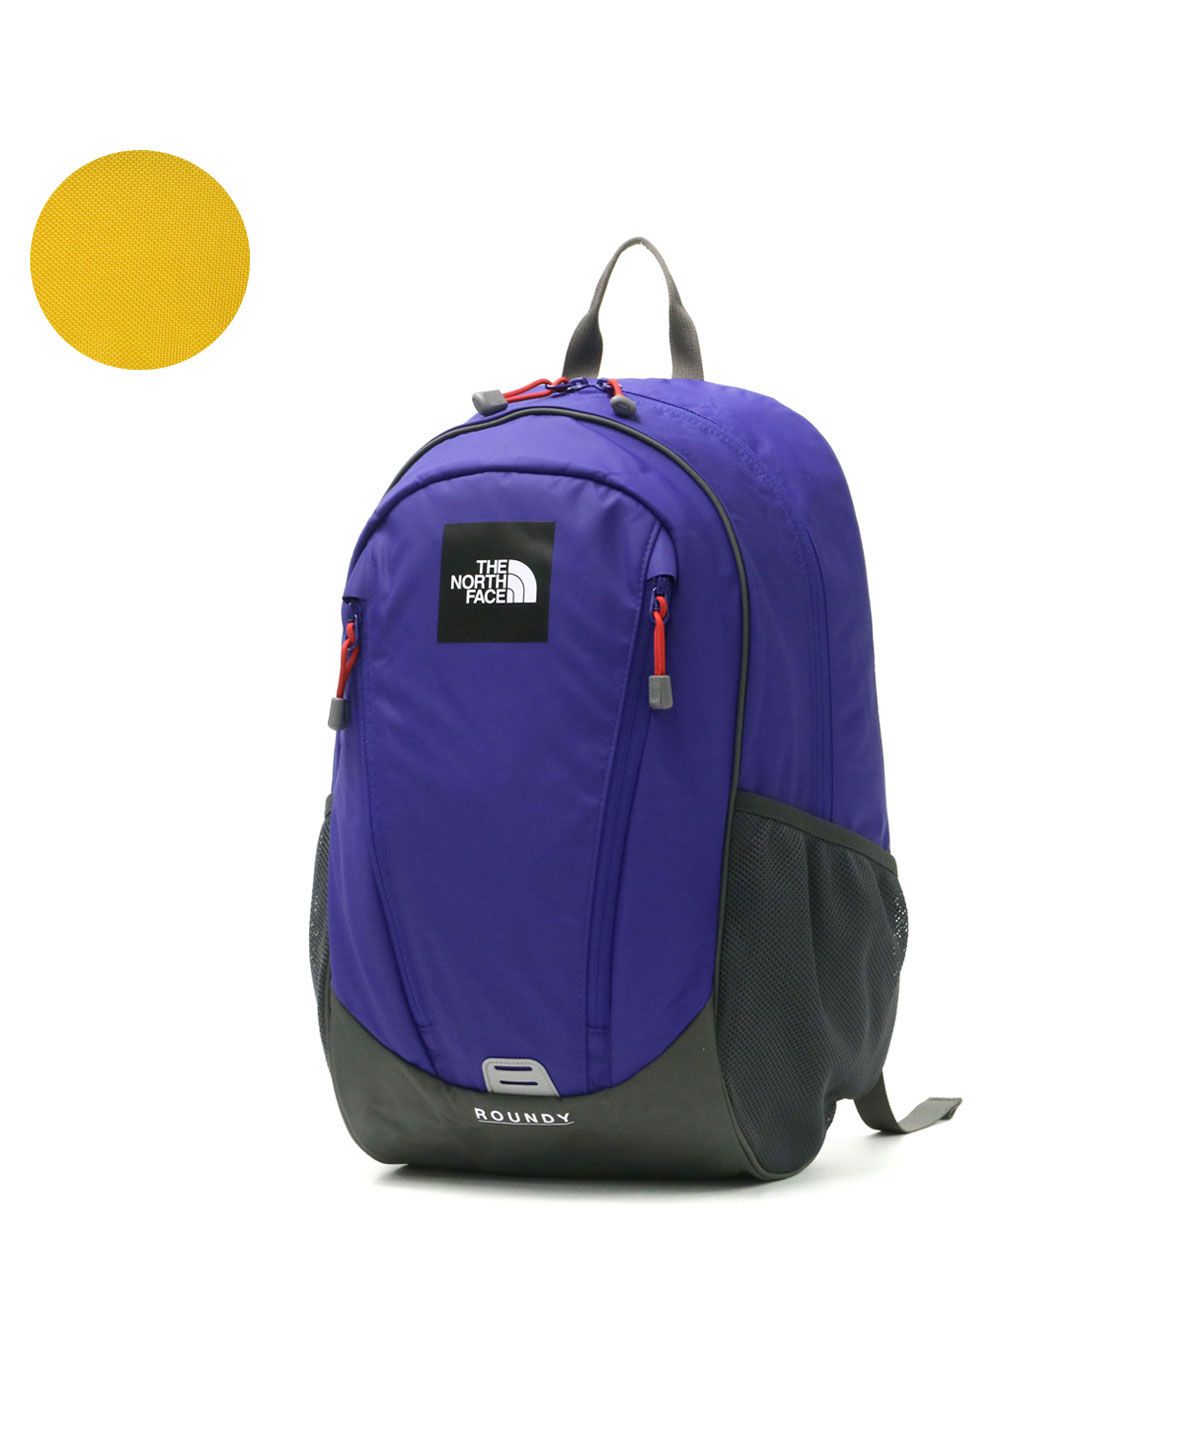 THE NORTH FACE ROUNDY 22L 新品未使用